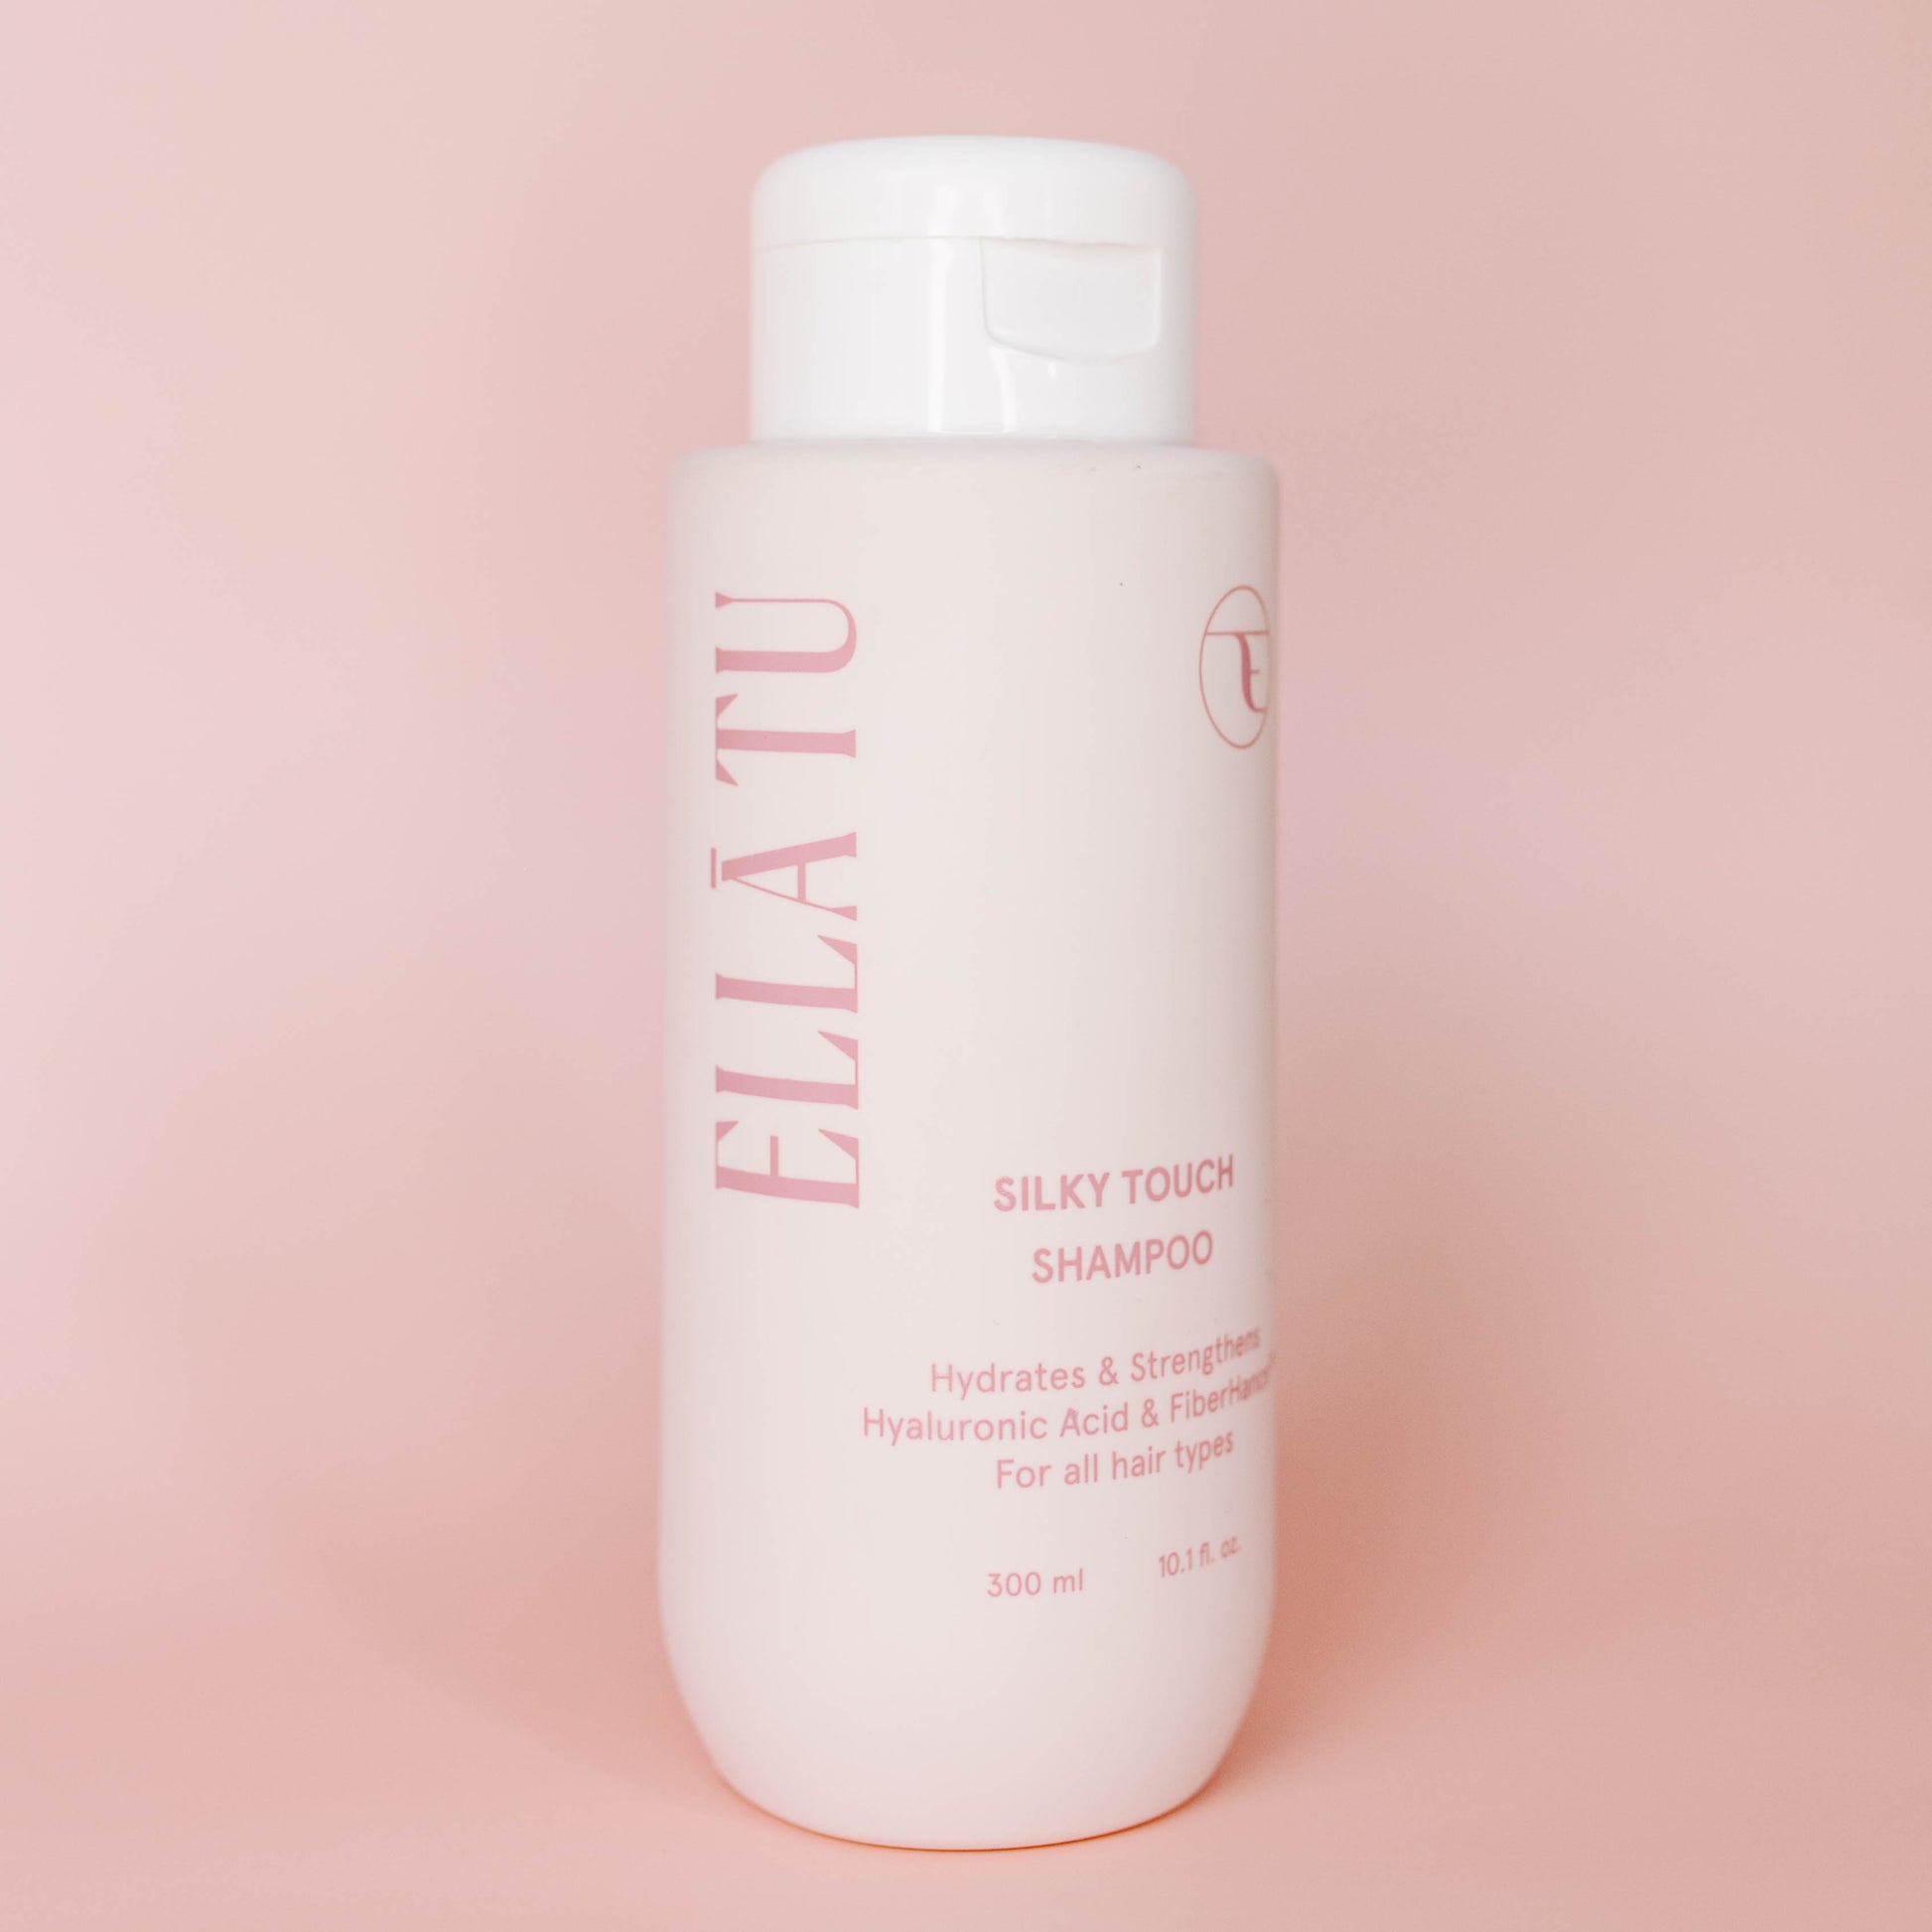 Ellātu Silky Touch Shampoo is a gentle cleanser specially formulated for dry, damaged hair. It removes impurities without harsh detergents.